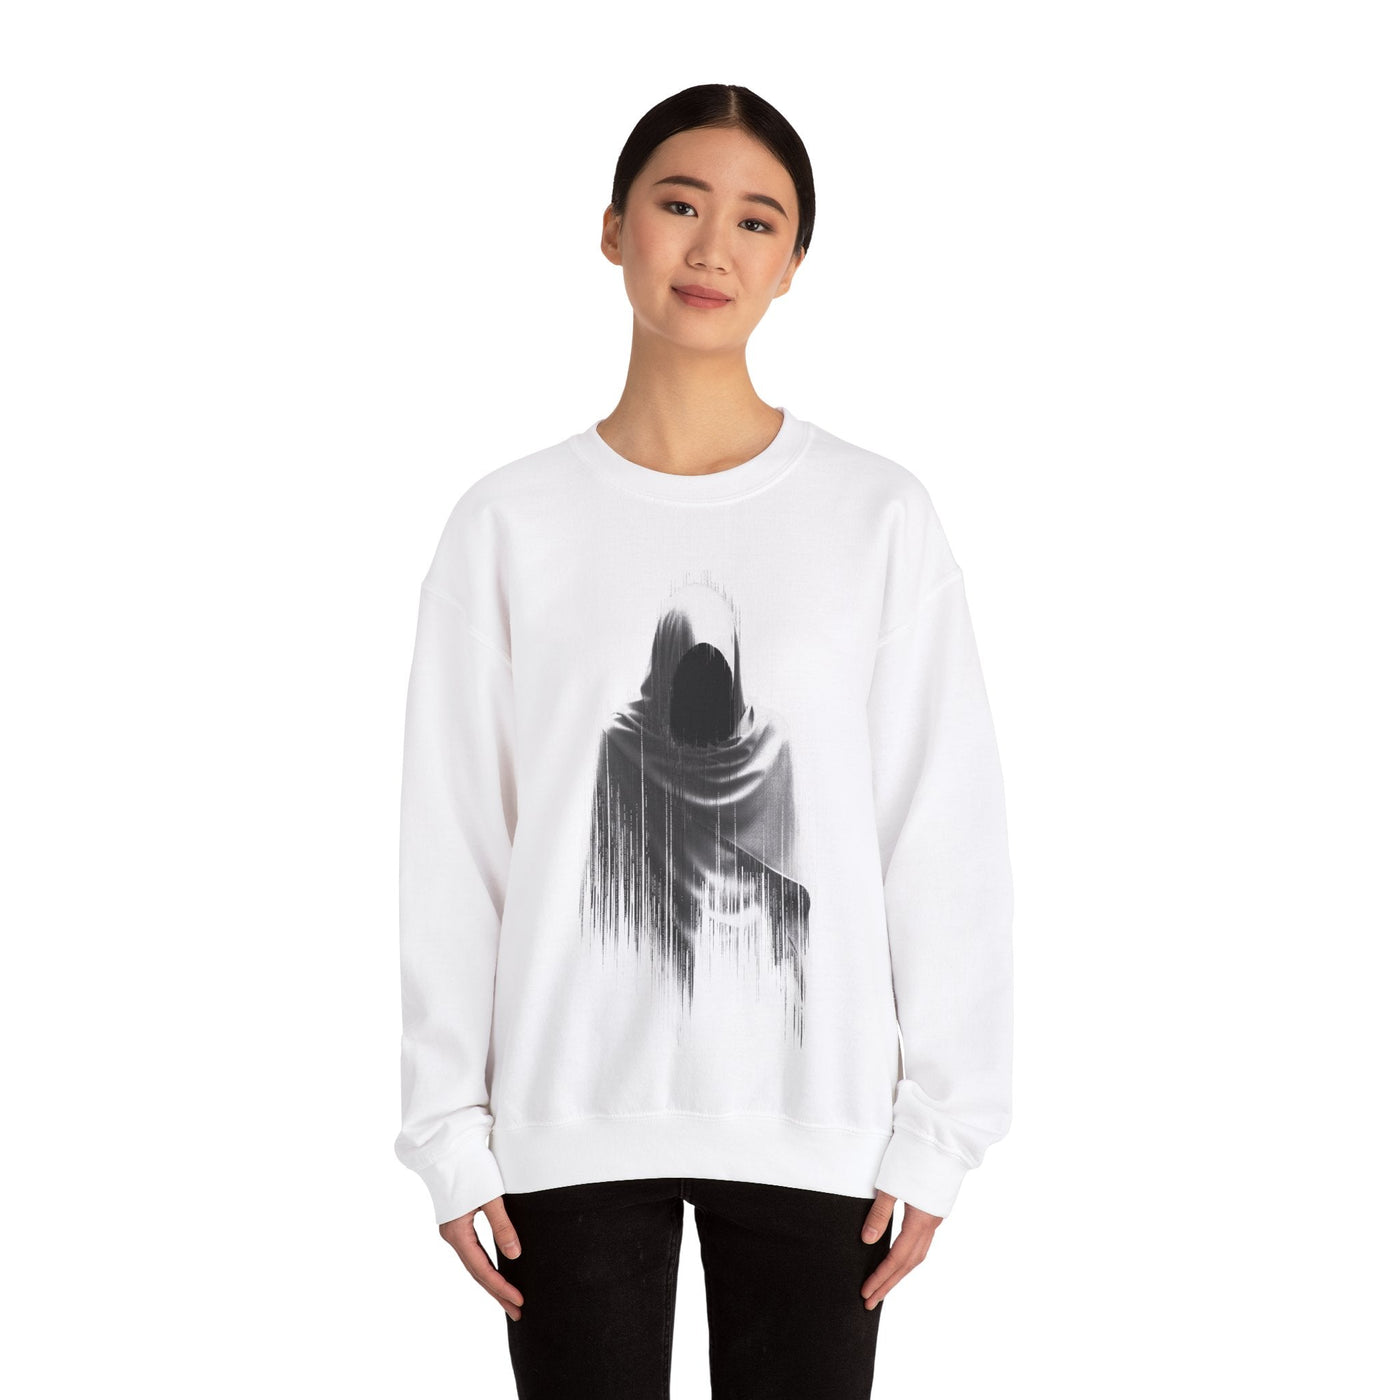 Glitchy Cloaked CTR Creature Classic Sweatshirt